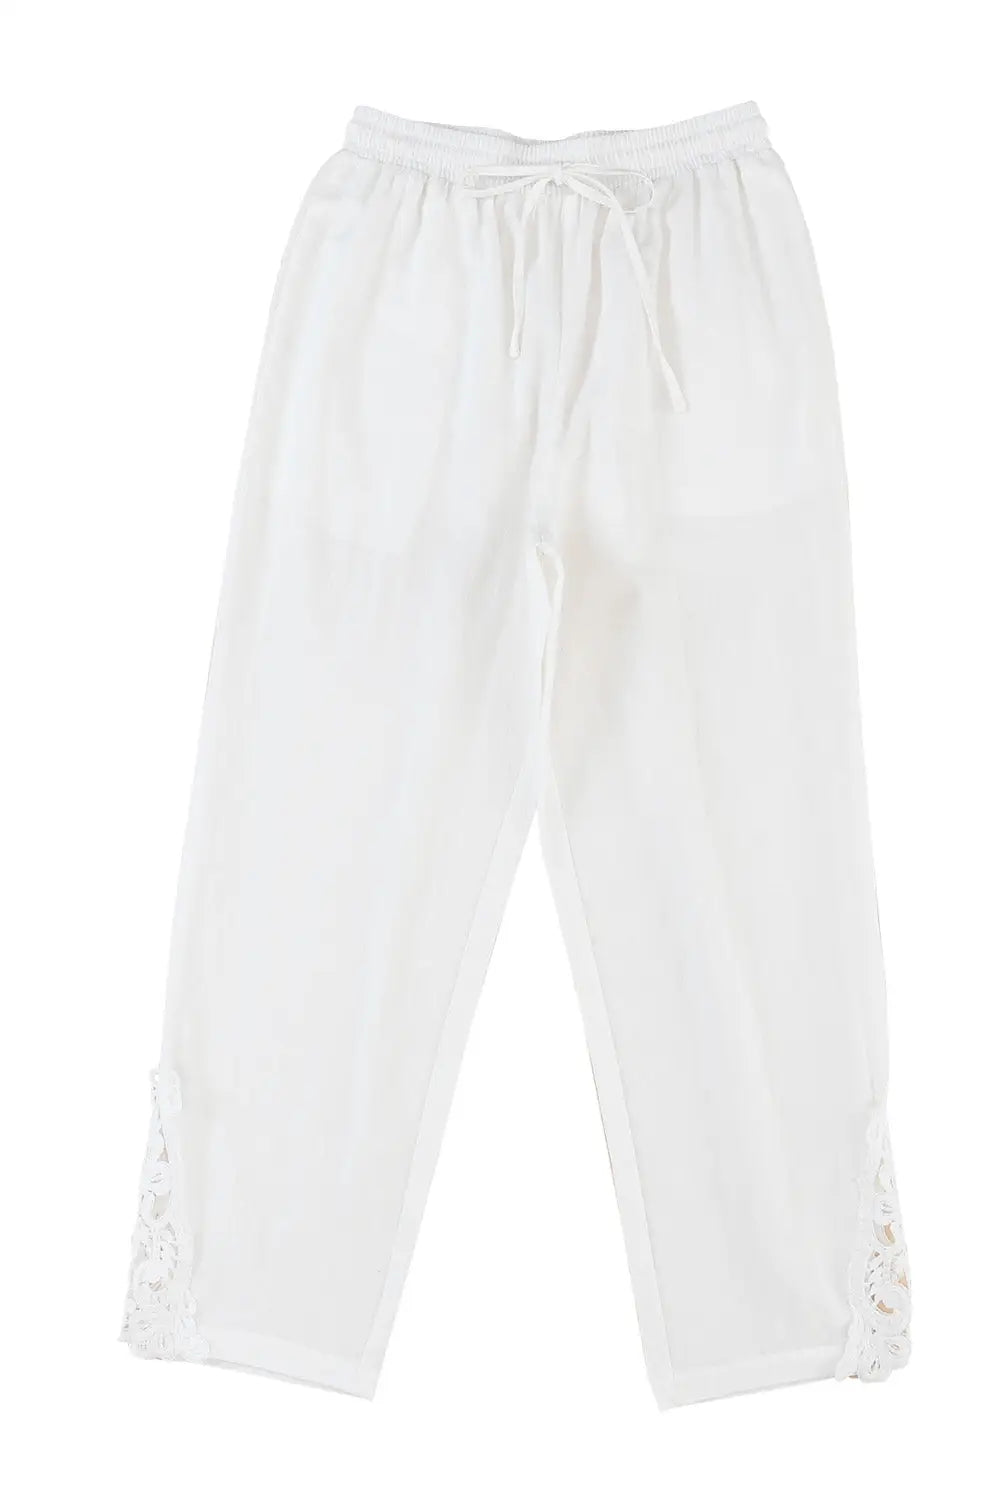 White lace splicing drawstring casual cotton pants - straight